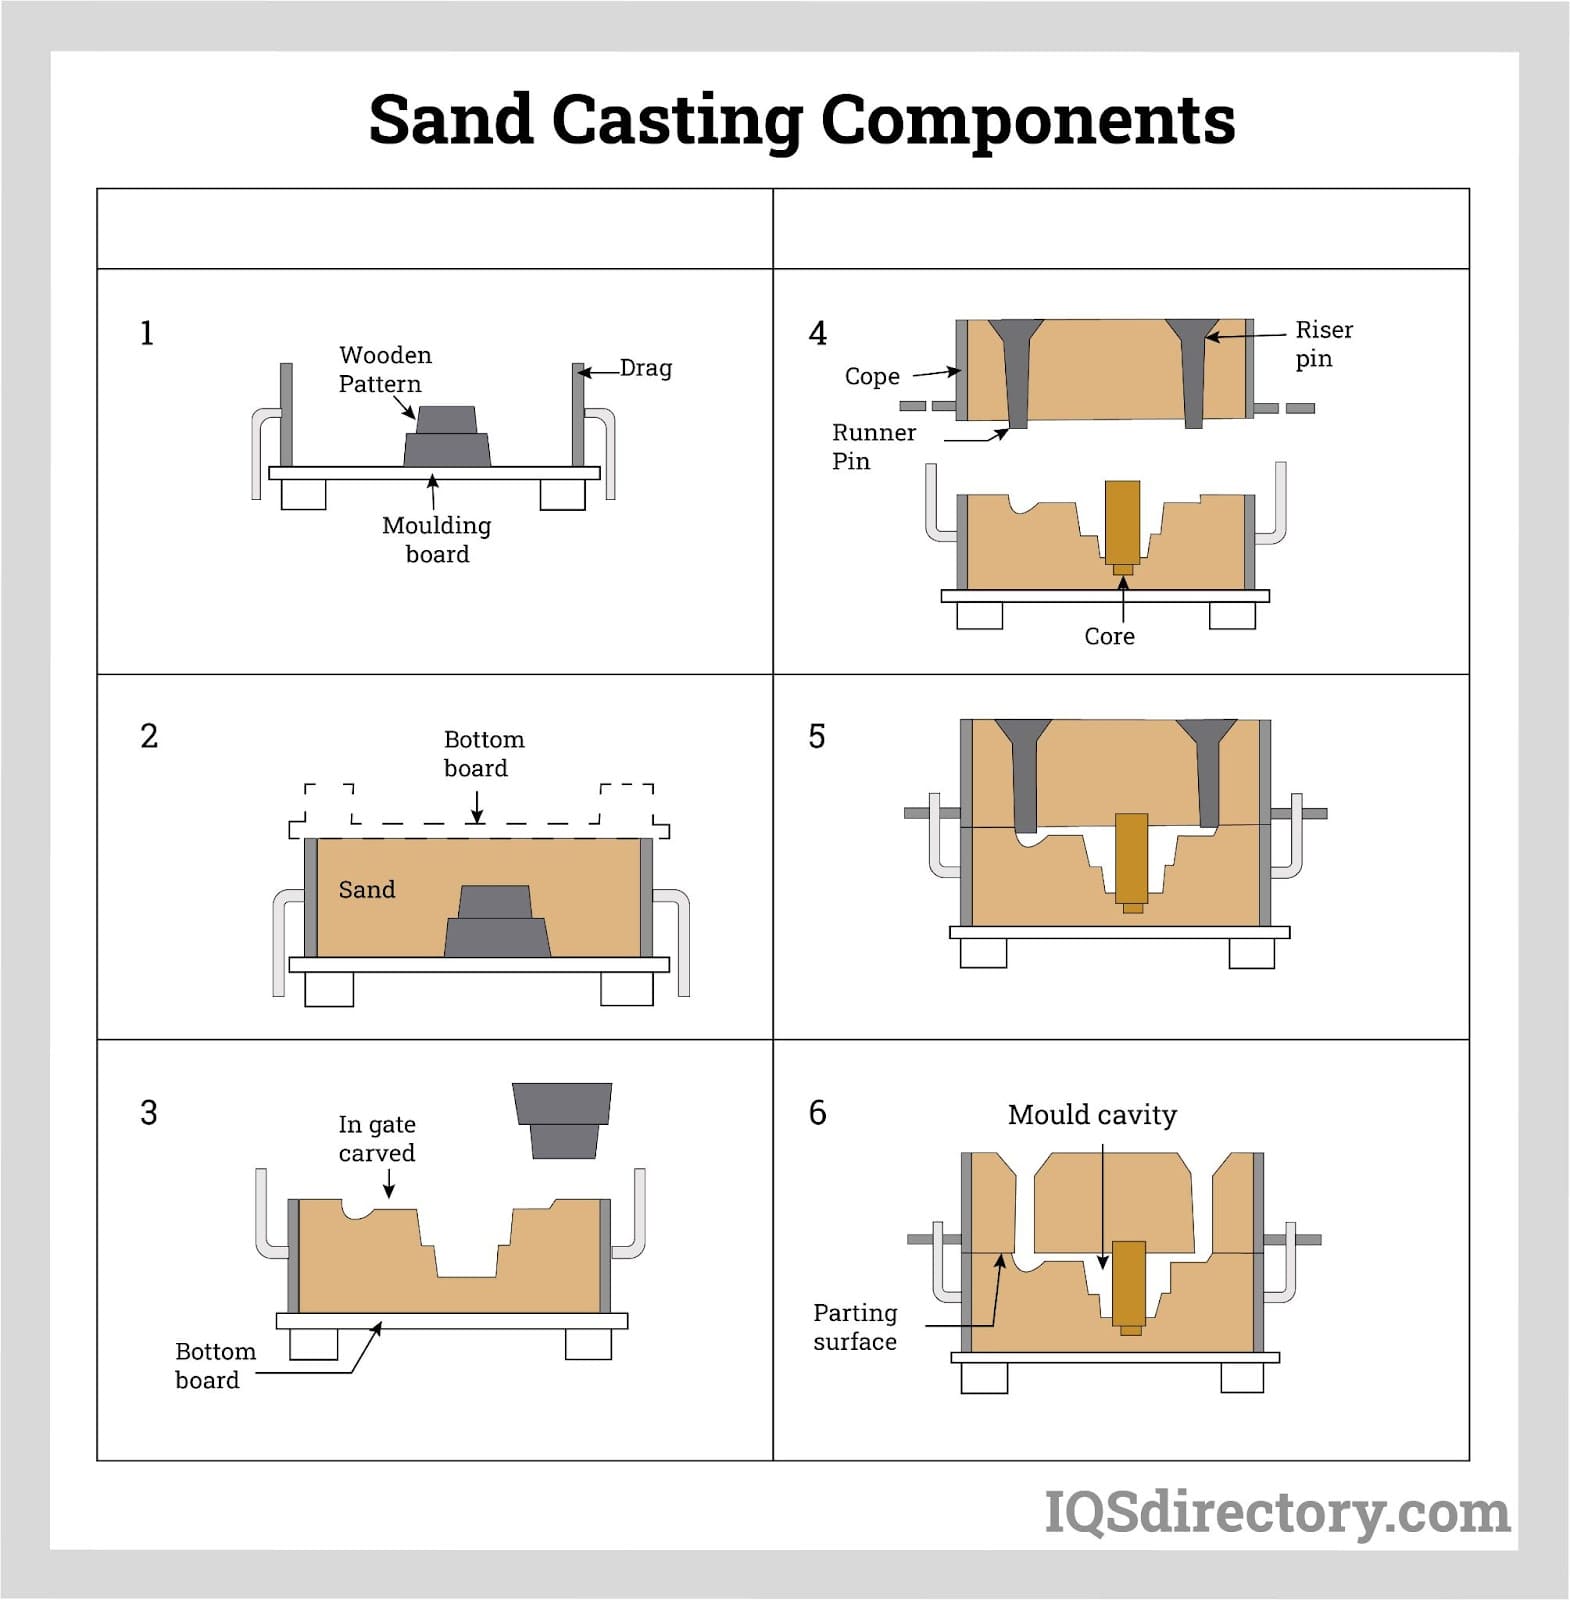 Sand Casting Components